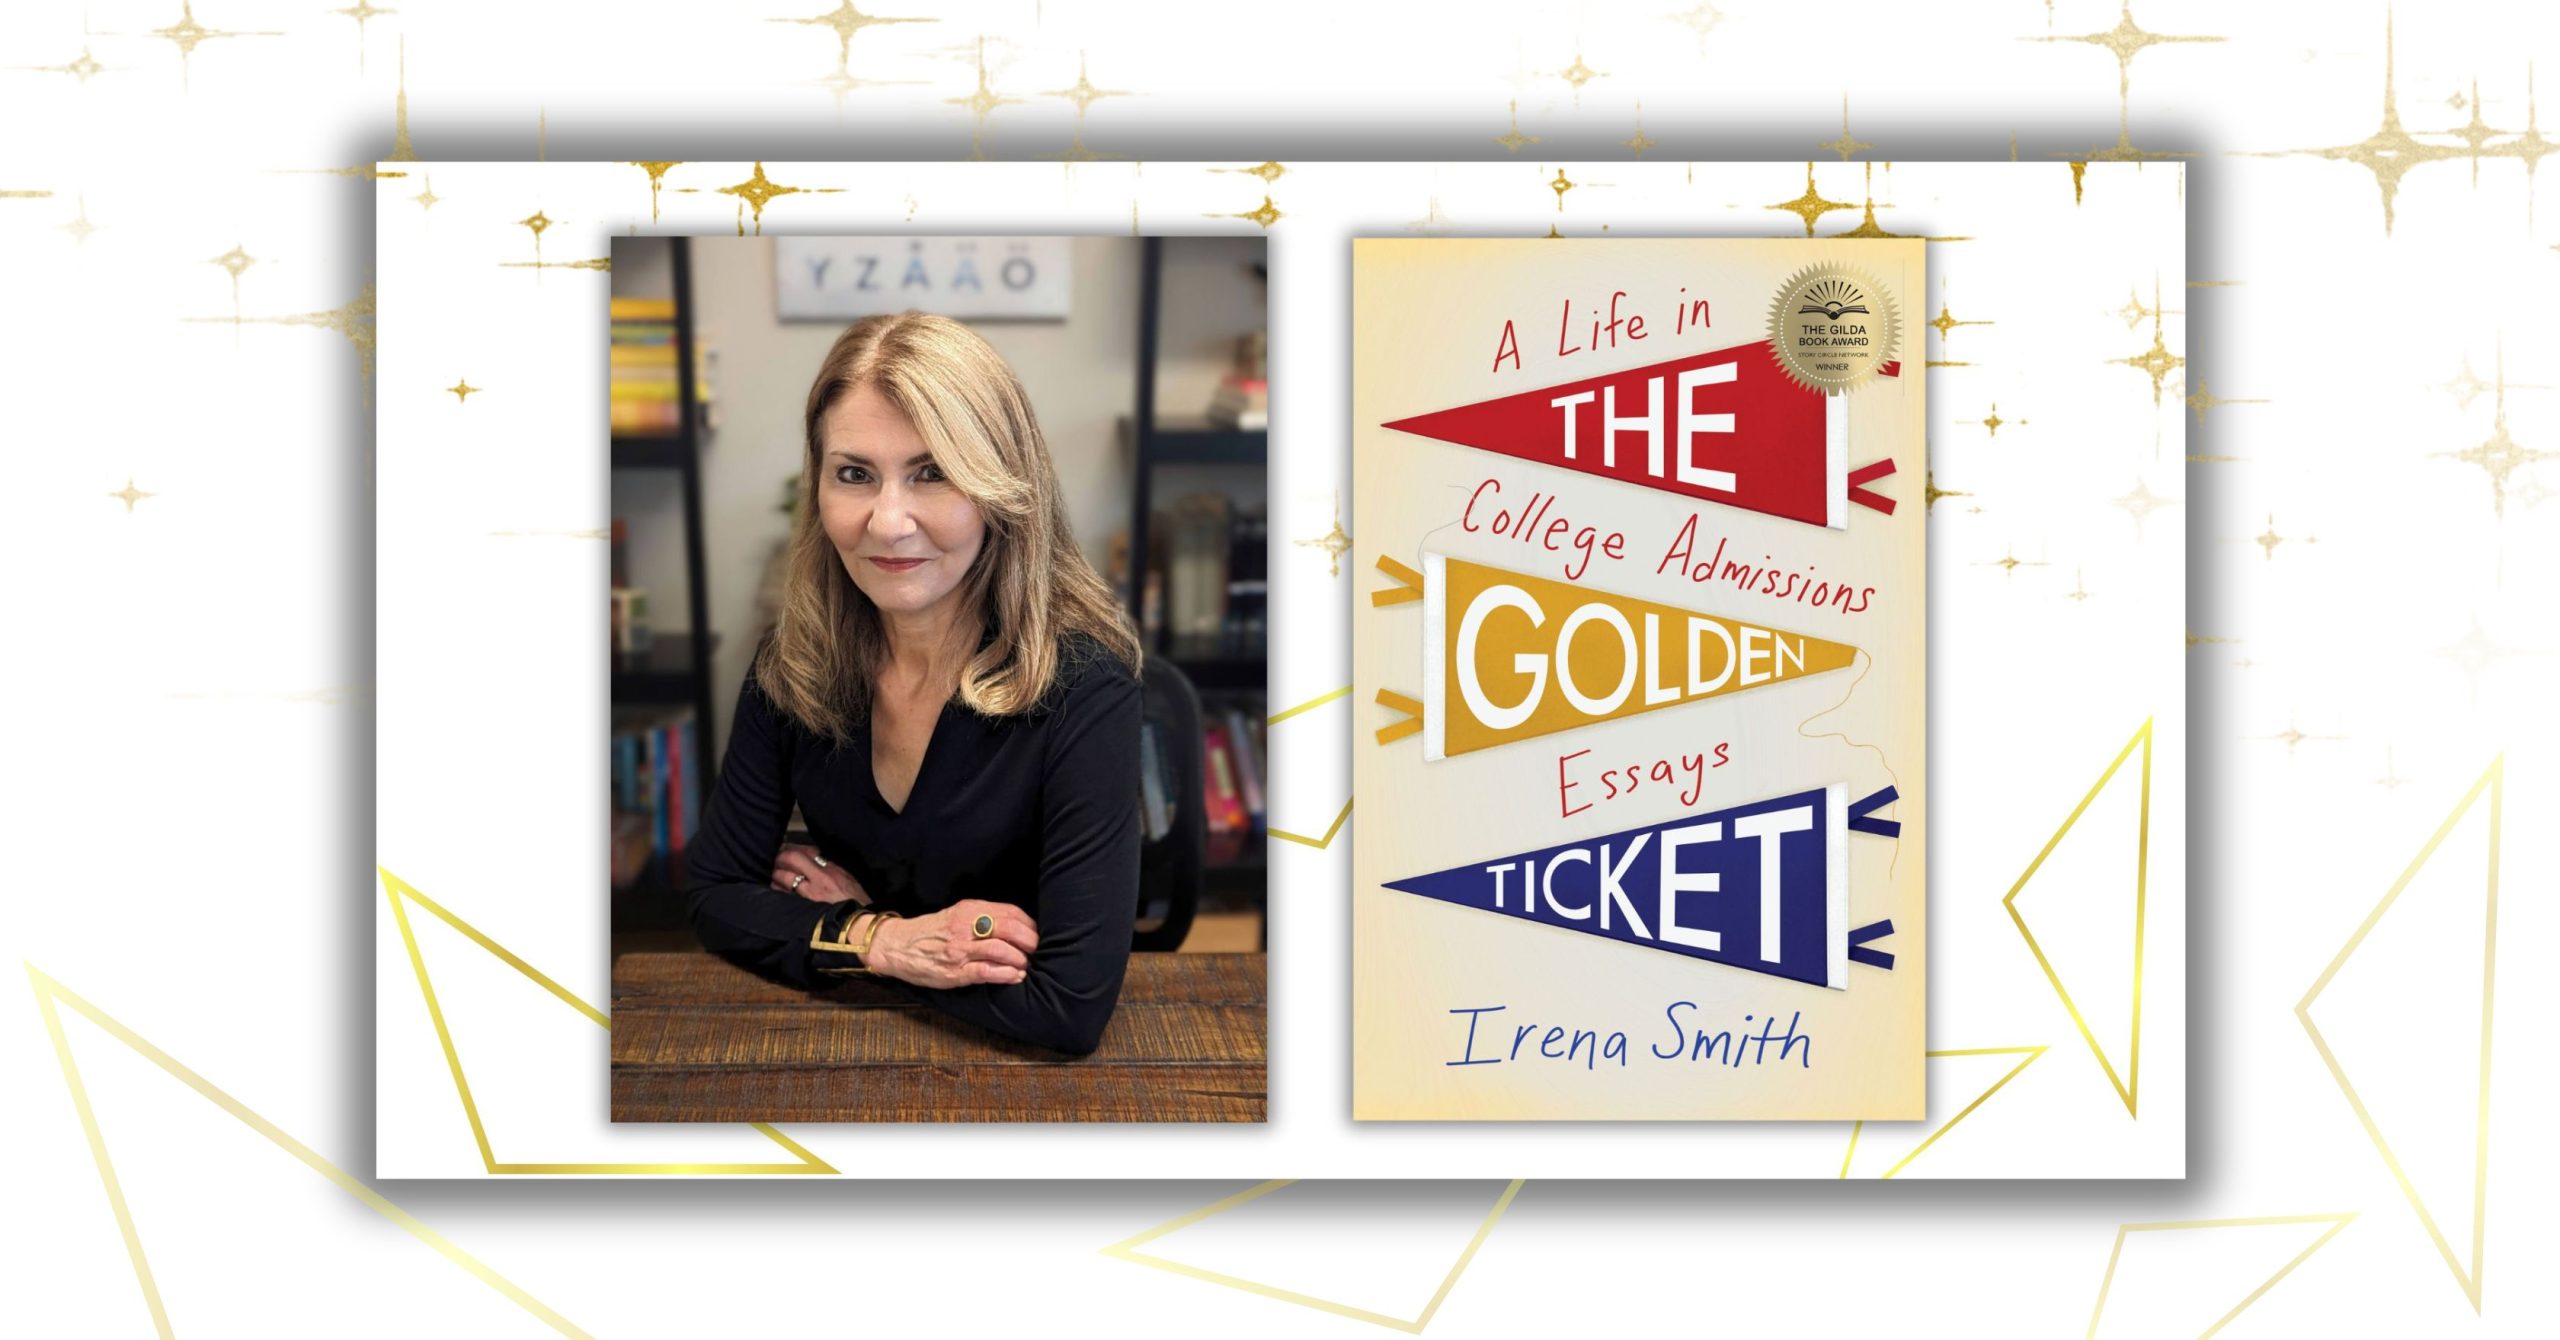 Image of author Irena Smith and the cover of her book The Golden Ticket: a Life in College Admissions Essays